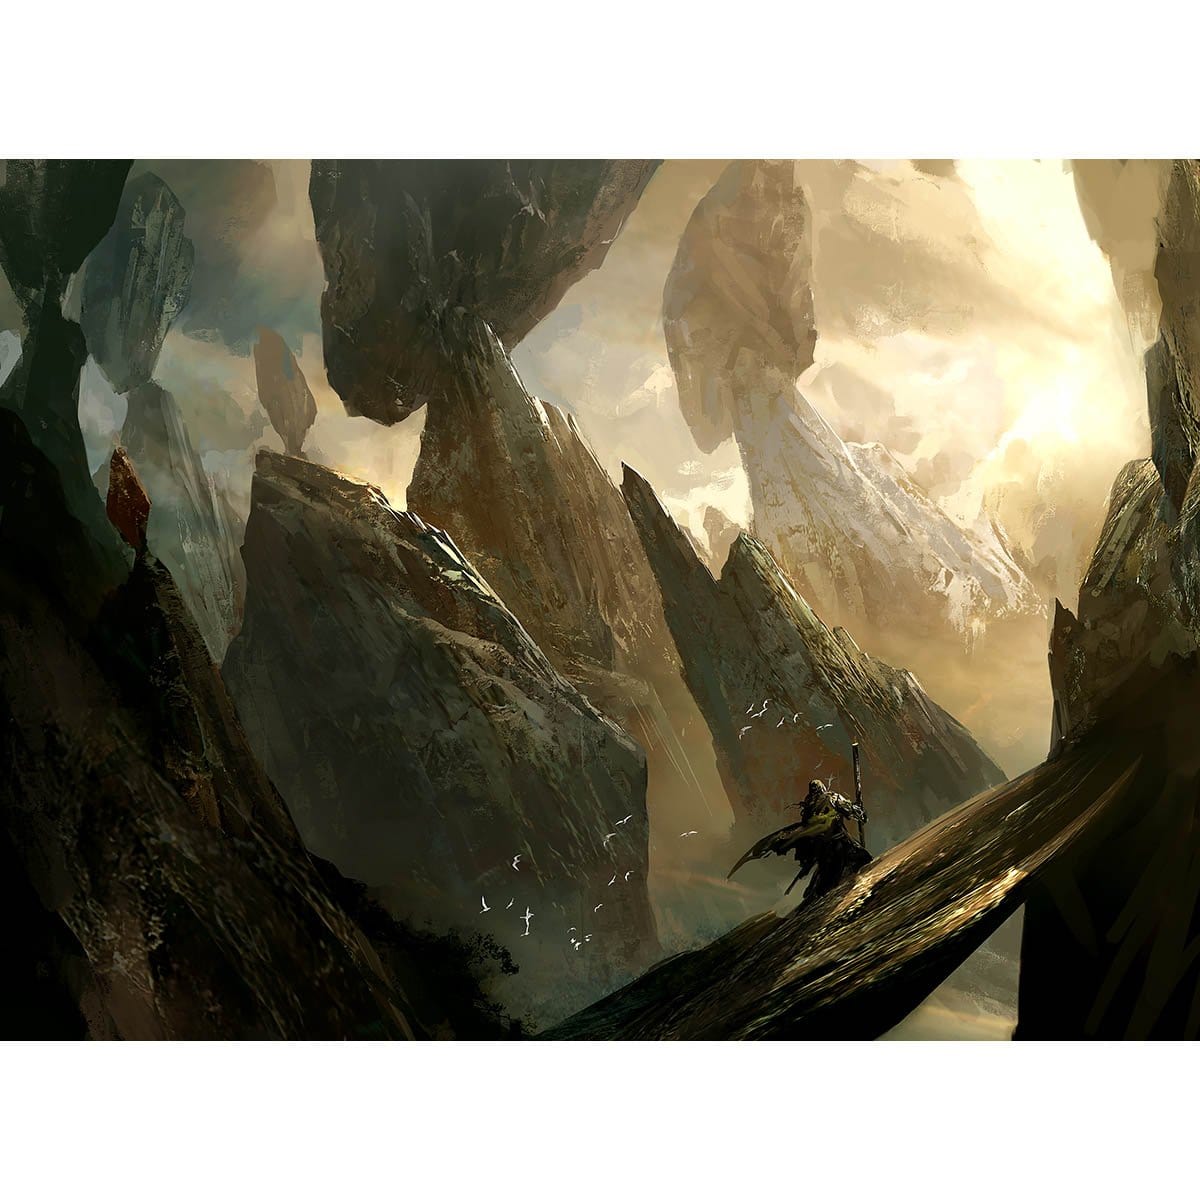 Teetering Peaks Print - Print - Original Magic Art - Accessories for Magic the Gathering and other card games